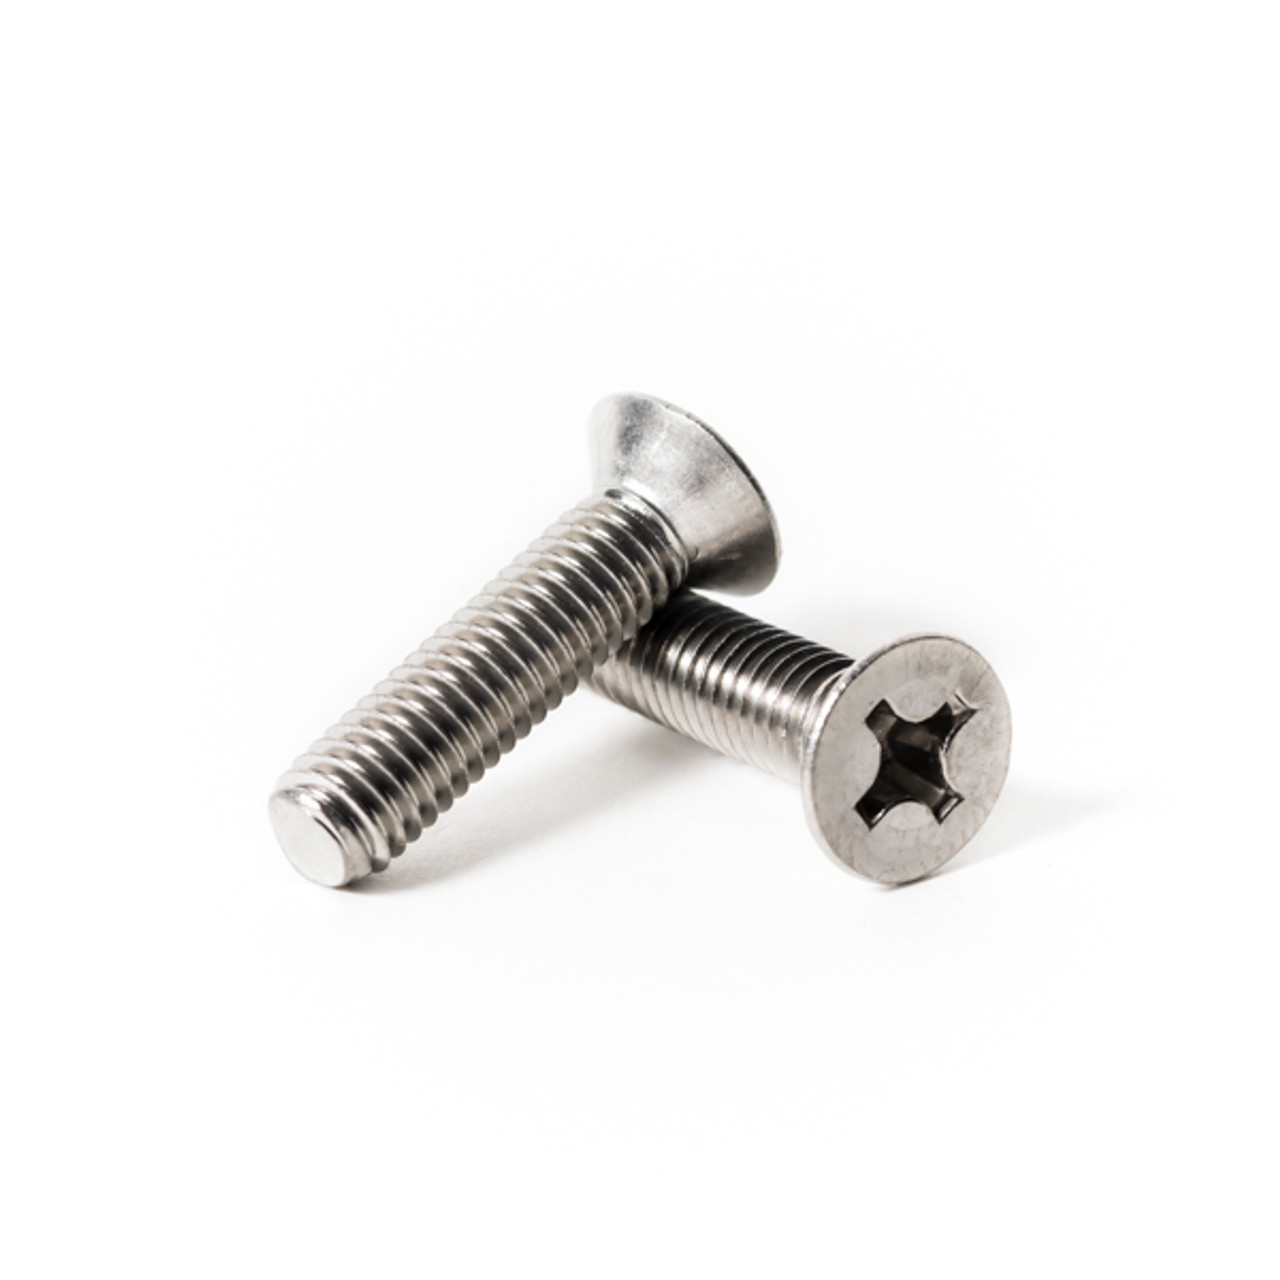 Phillips Flat Head Self-tapping Screws M3 M4 M5 M6 Small Screw A2Stainless Steel 